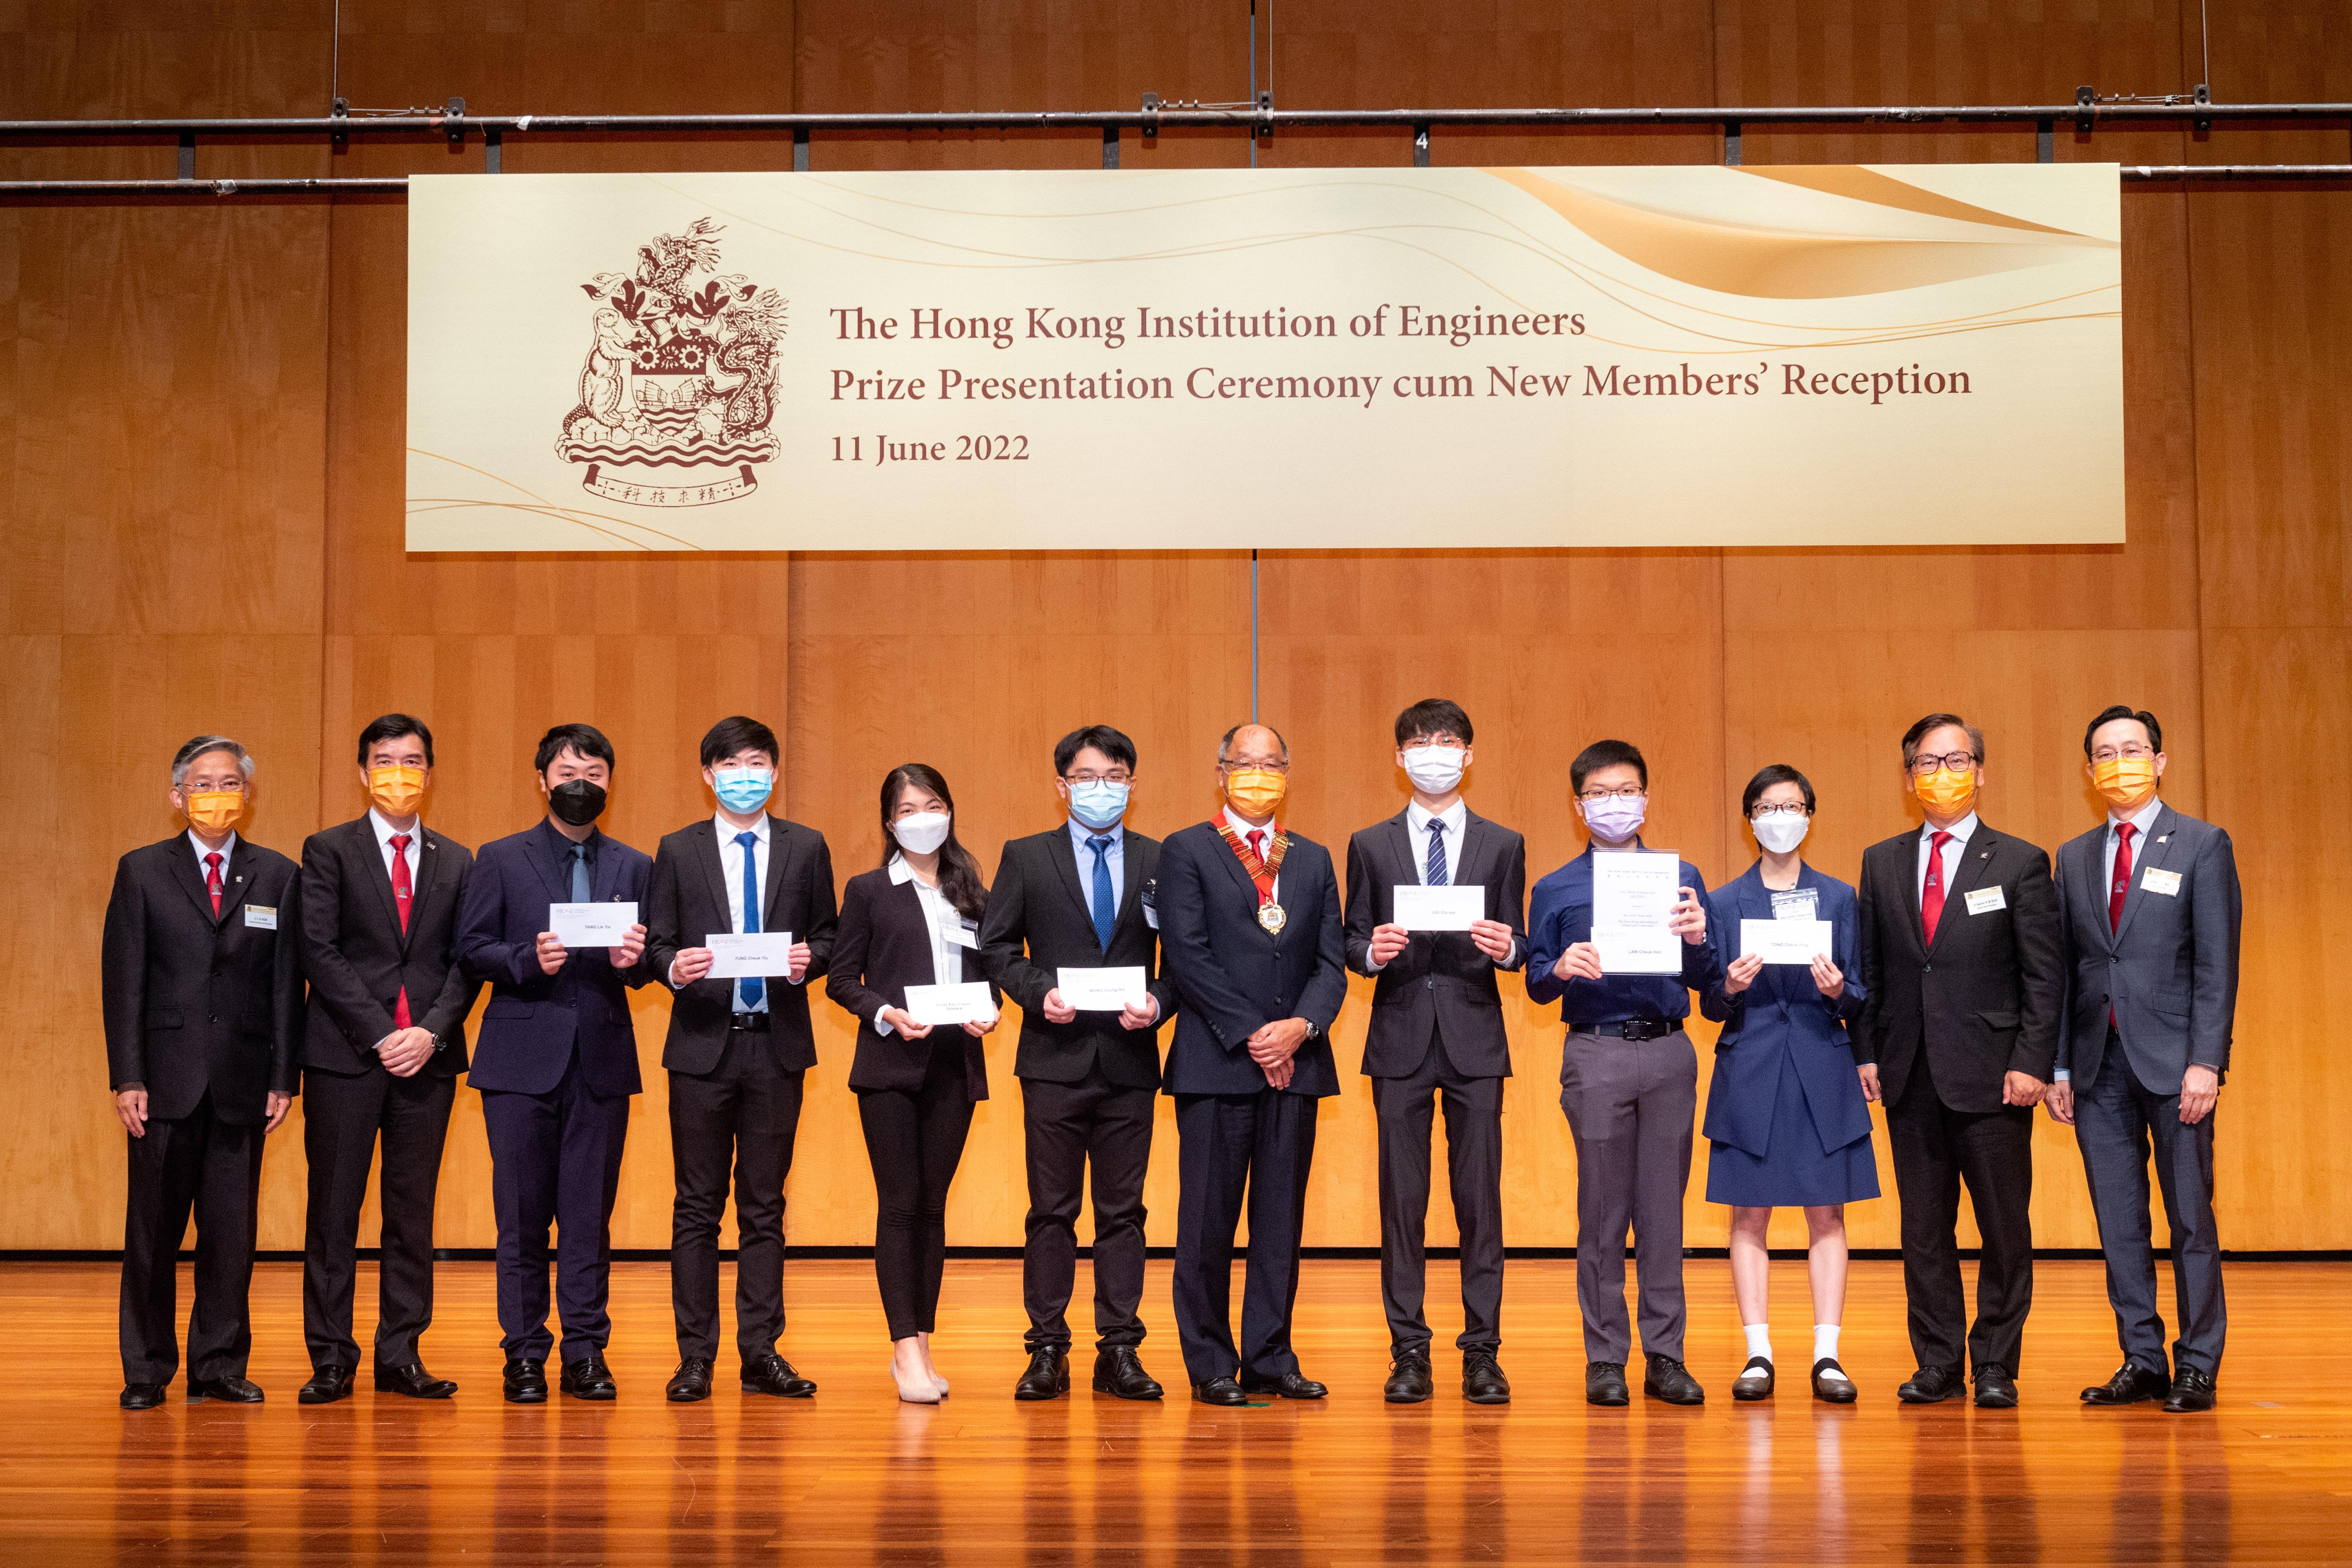 HKUST engineering students Law Cheuk-Him (fourth right), Liu Chi-Hin (fifth right), and Cindy Aiko Filbert Tanaka (fifth left) received a HKIE Scholarship at the HKIE Prize Presentation Ceremony cum New Members’ Reception.